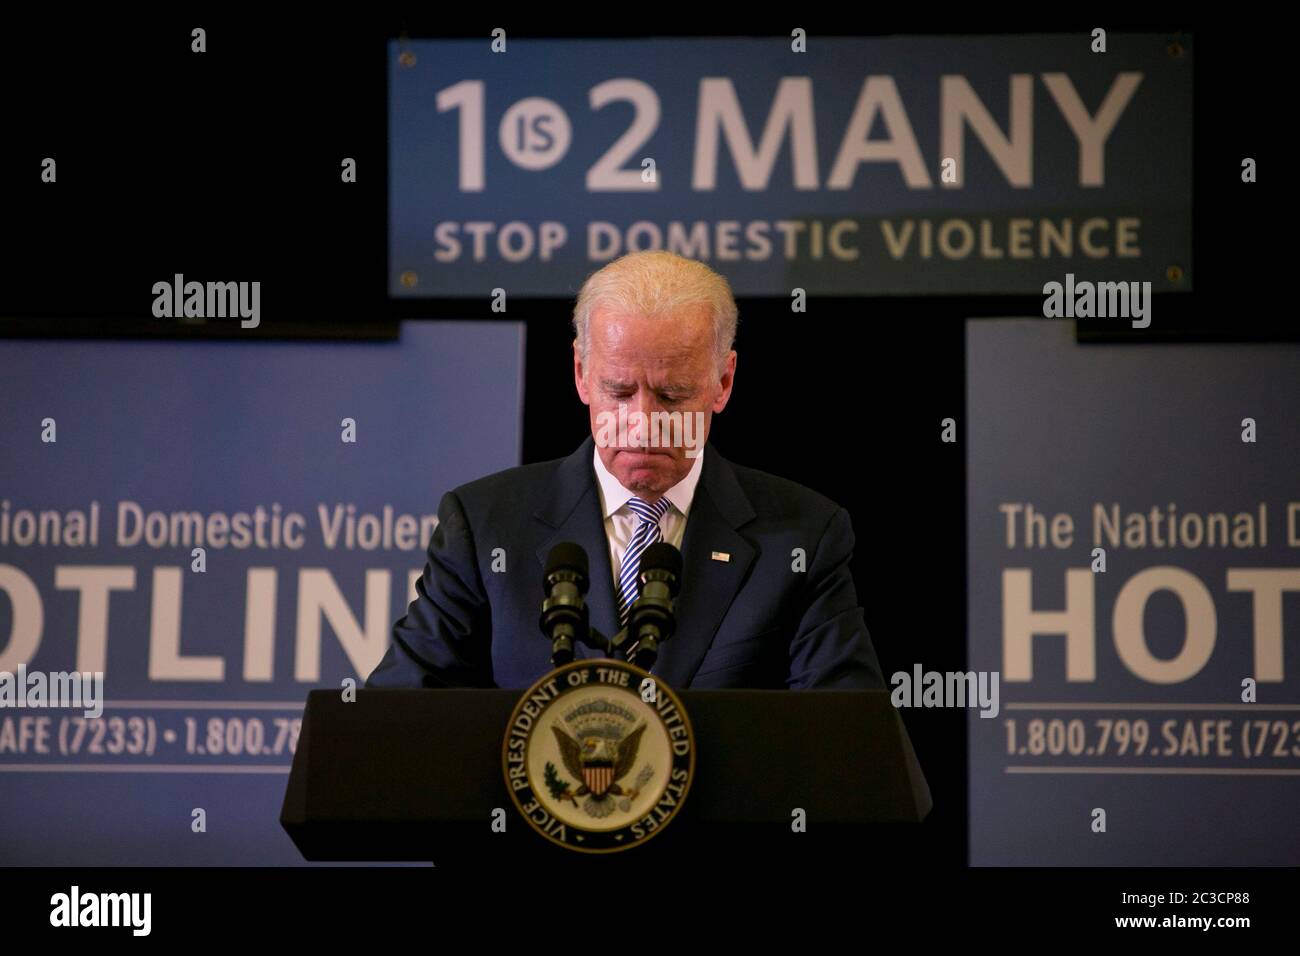 October 30th, 2013 Austin, Texas, USA: Vice President Joe Biden speaks at the headquarters of the National Domestic Violence Hotline to commemorate National Domestic Violence Awareness Month.  ©Marjorie Kamys Cotera/Daemmrich Stock Photo